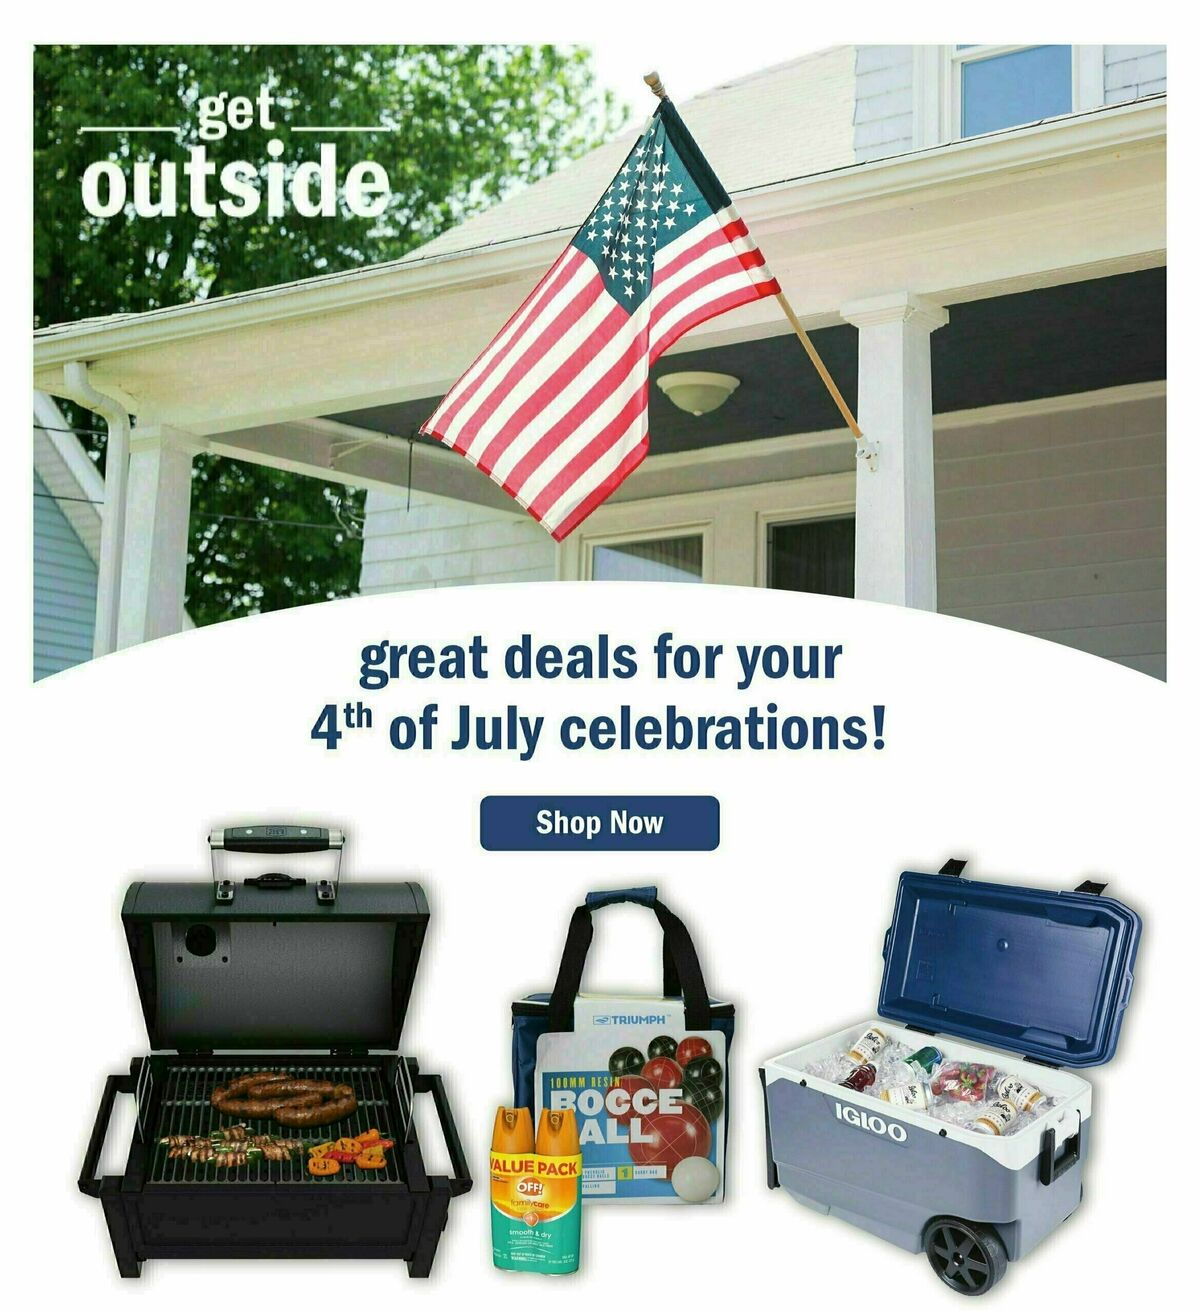 Meijer Weekly Ad from June 23